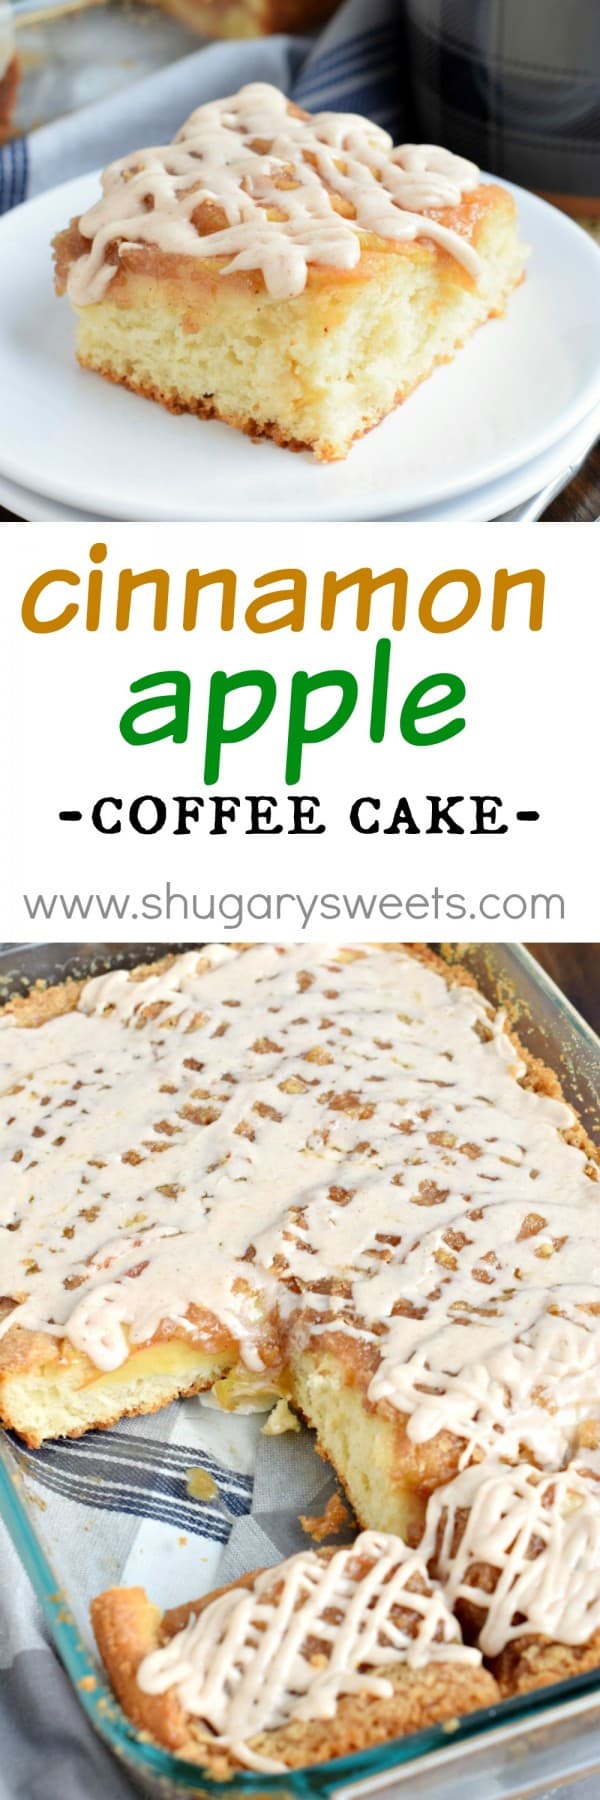 A delicious Cinnamon Apple Coffee Cake with the texture and flavor of cinnamon rolls! No need to shape or knead the delicious dough!